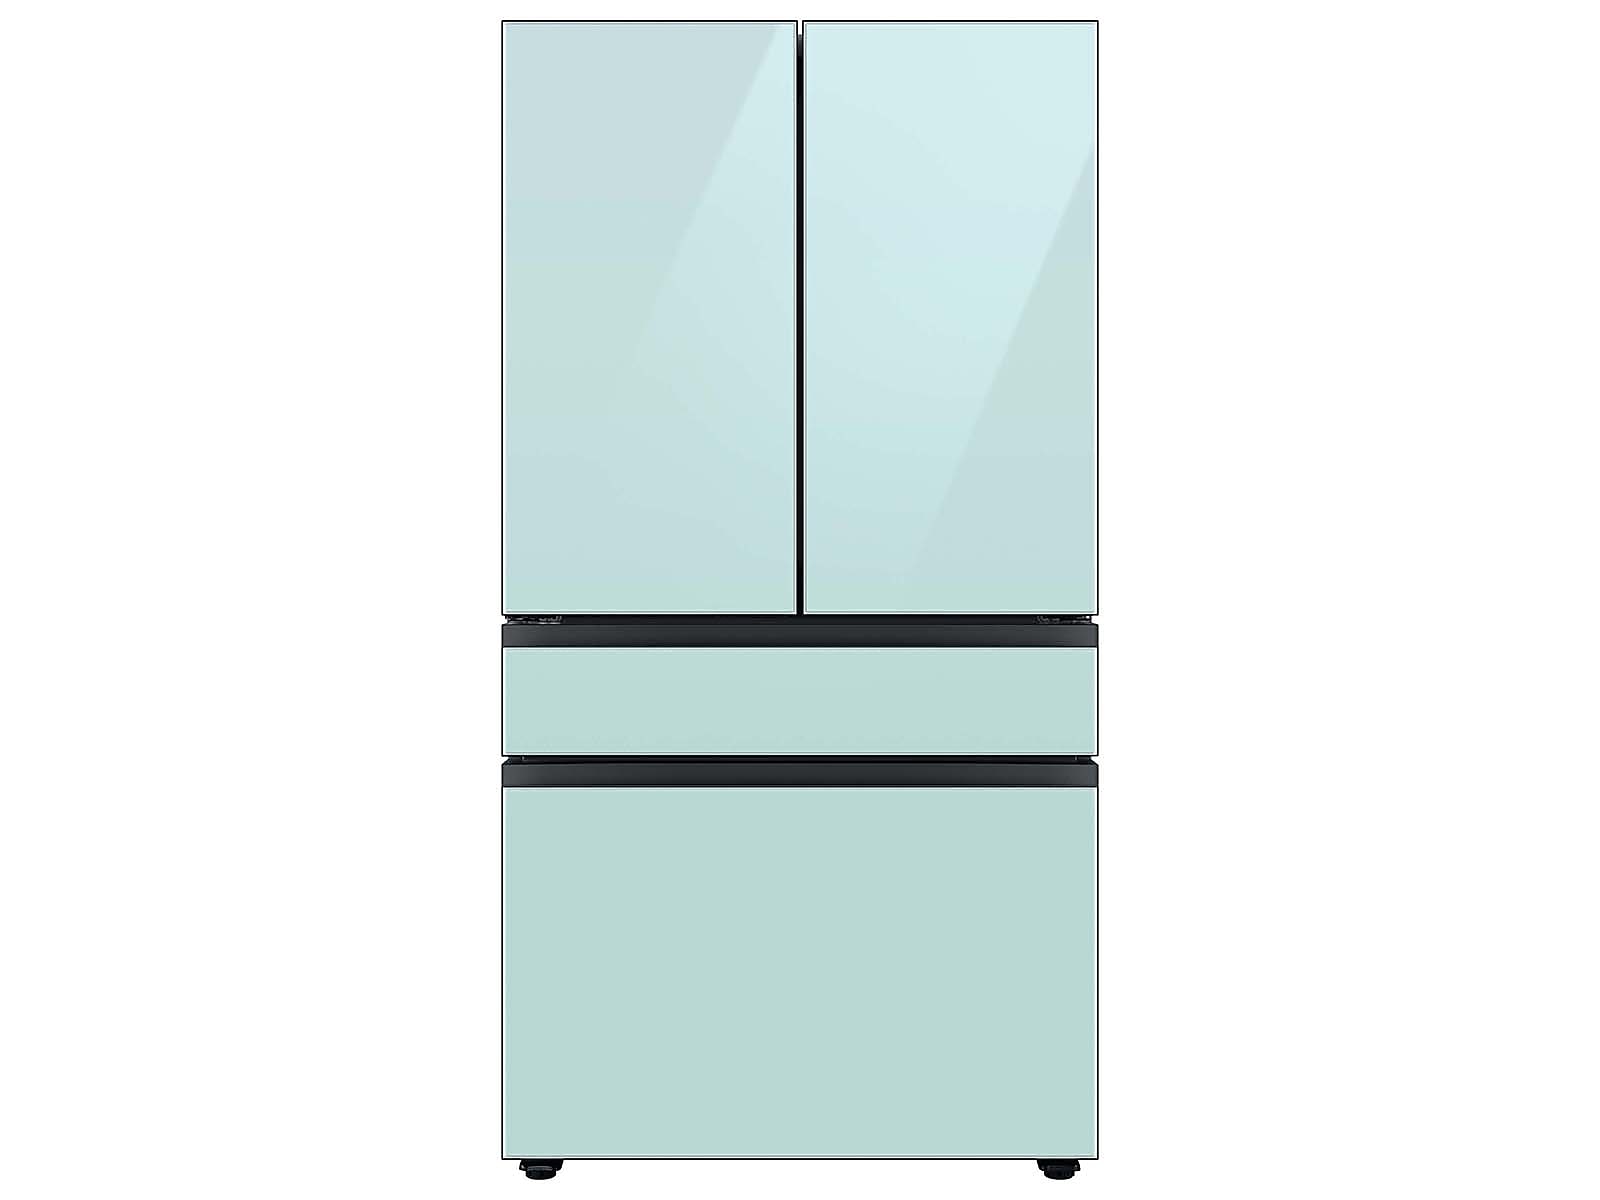 Samsung Bespoke 4-Door French Door Refrigerator in White Glass (29 cu. ft.) with Customizable Door Panel Colors and Beverage Center™ in Morning Blue Glass